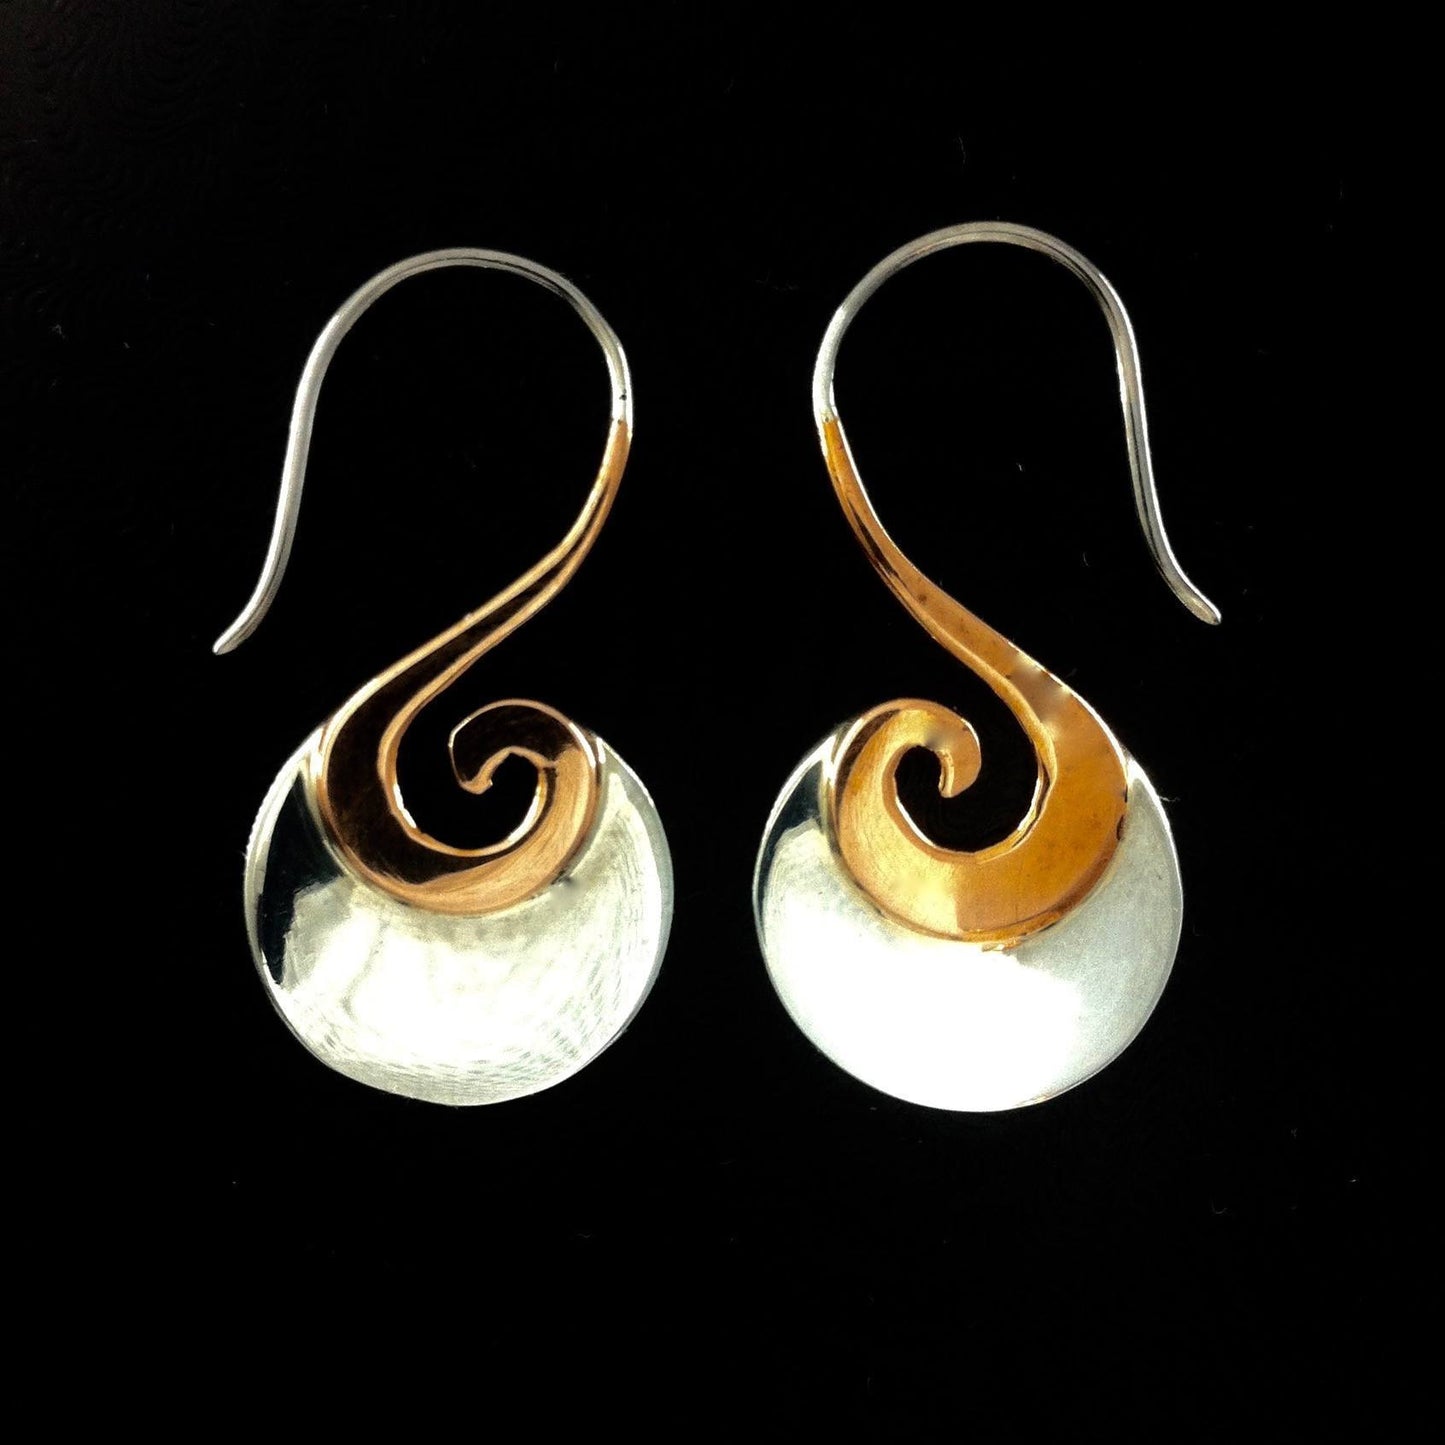 Tribal Jewelry :|: Sterling Silver Earrings, with copper highlights, $34 | Tribal Earrings